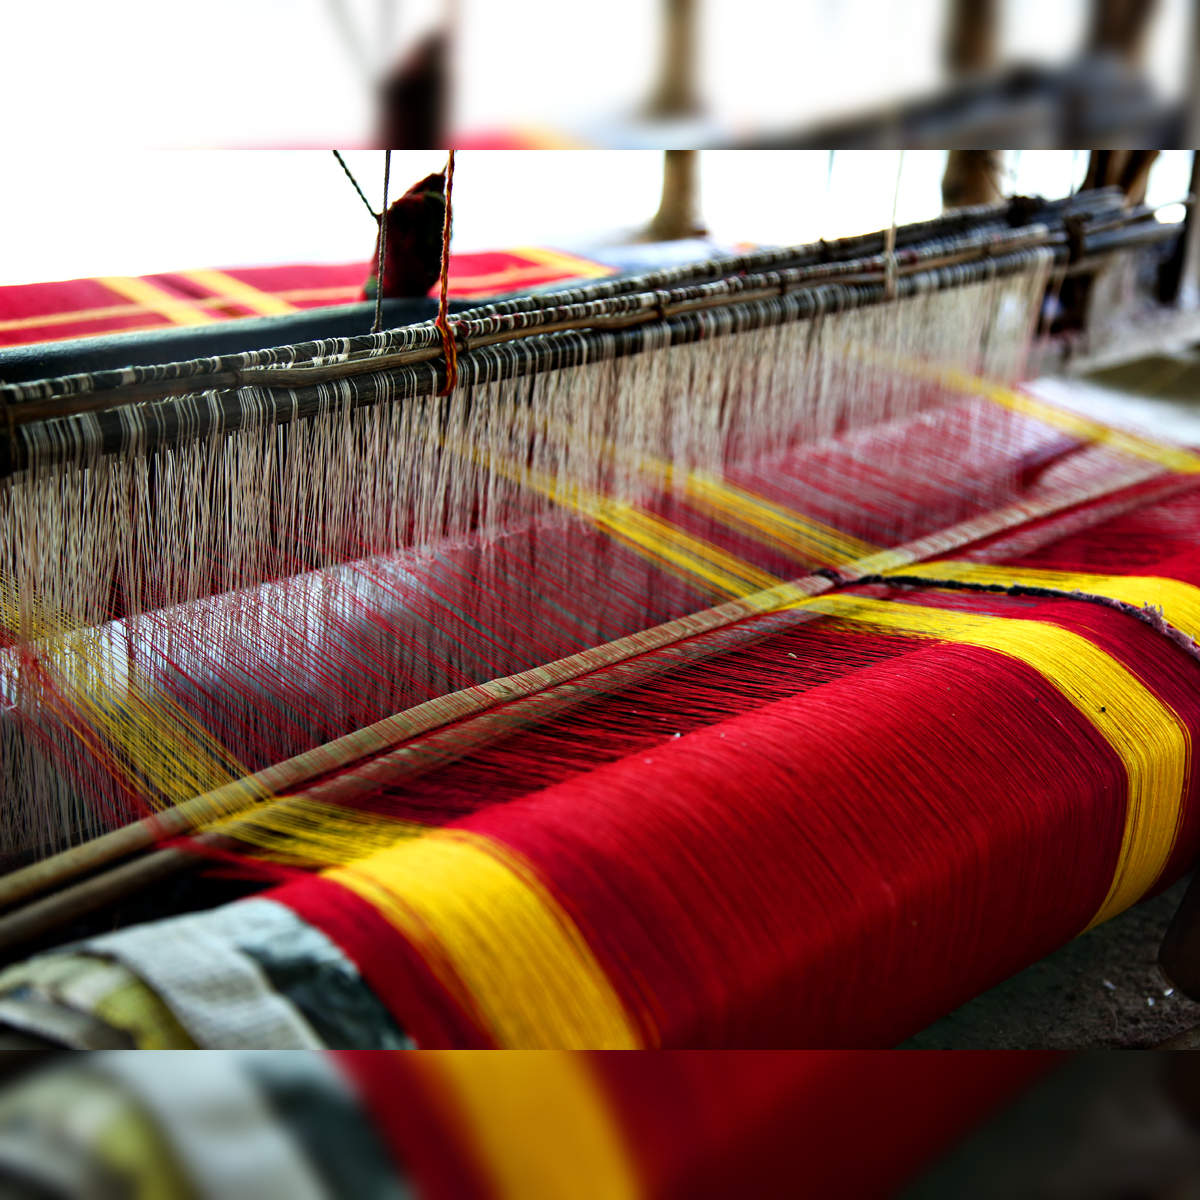 5 Easy Ways to Check if Your Cotton is Khadi, Handloom or Mill-produced!